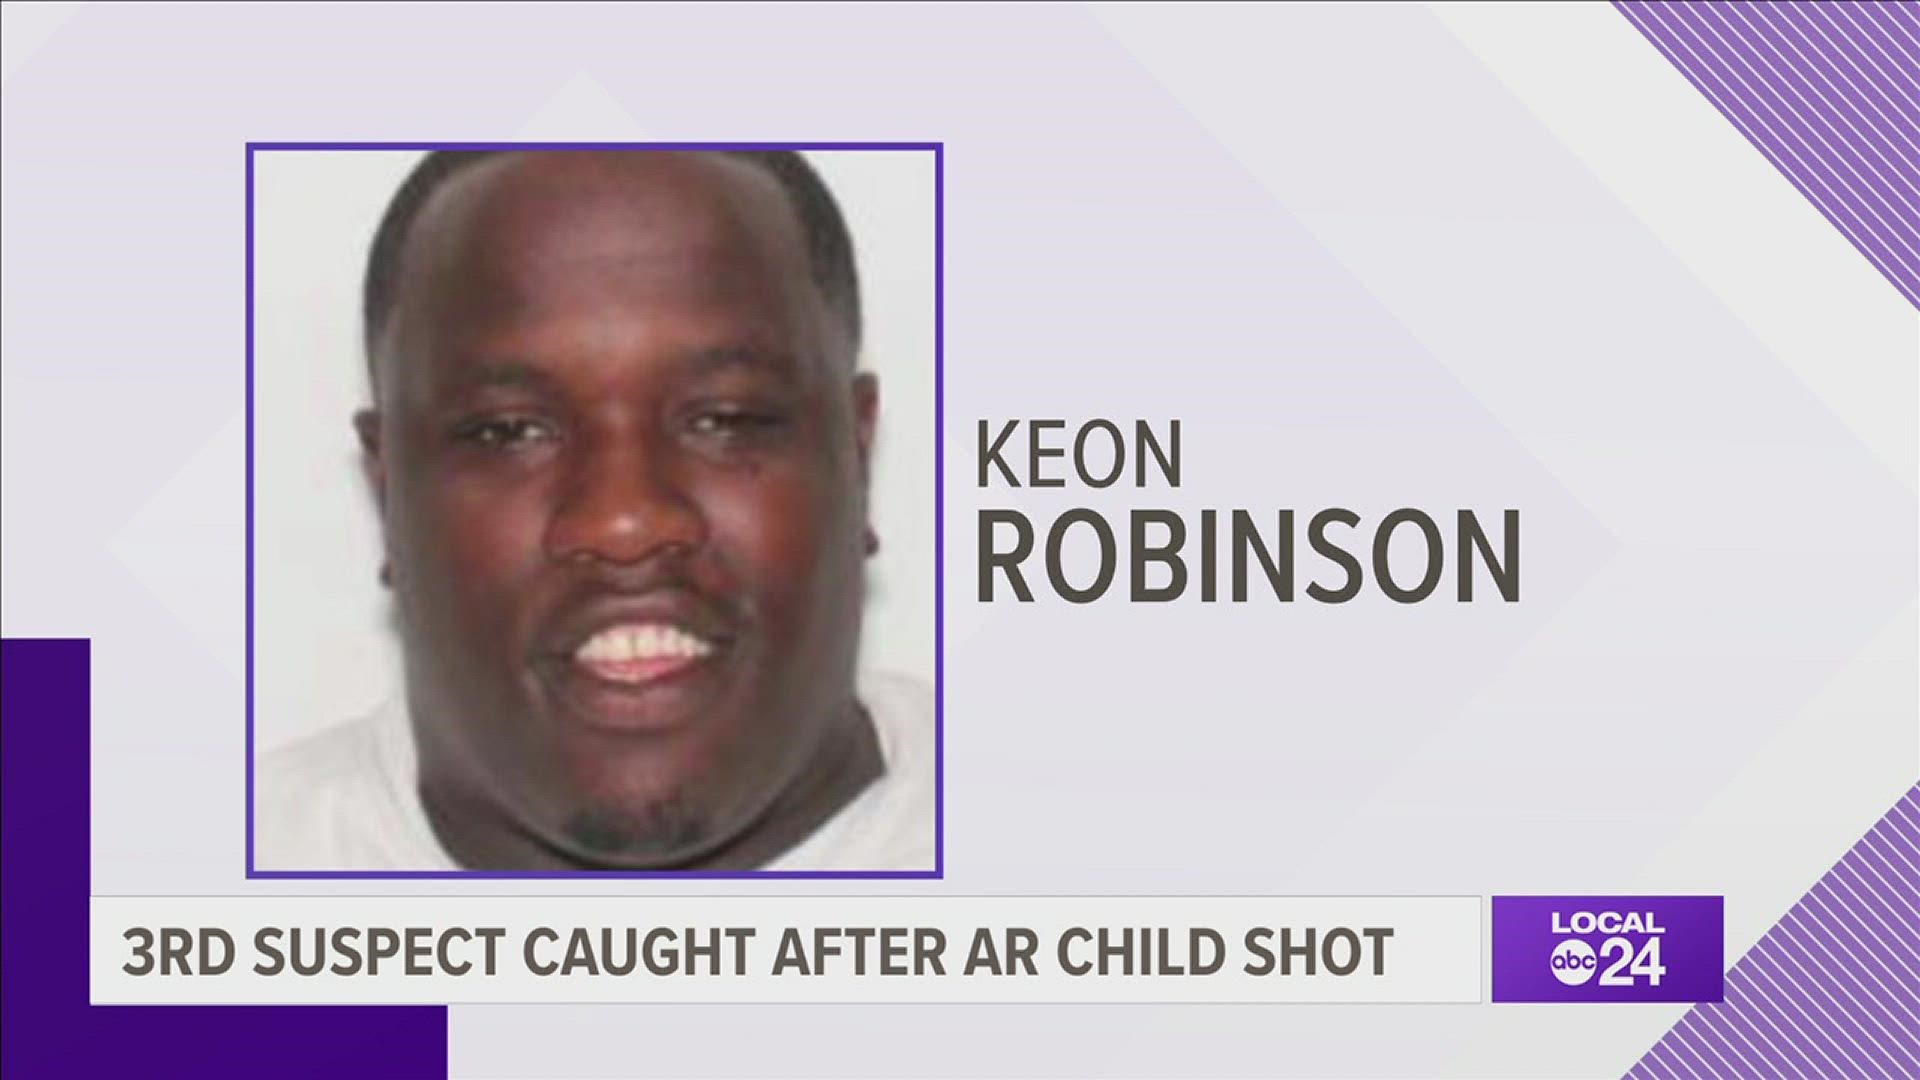 Keon Robinson was arrested on felony warrants for first degree battery and discharging a firearm from the vehicle in connection with the shooting.